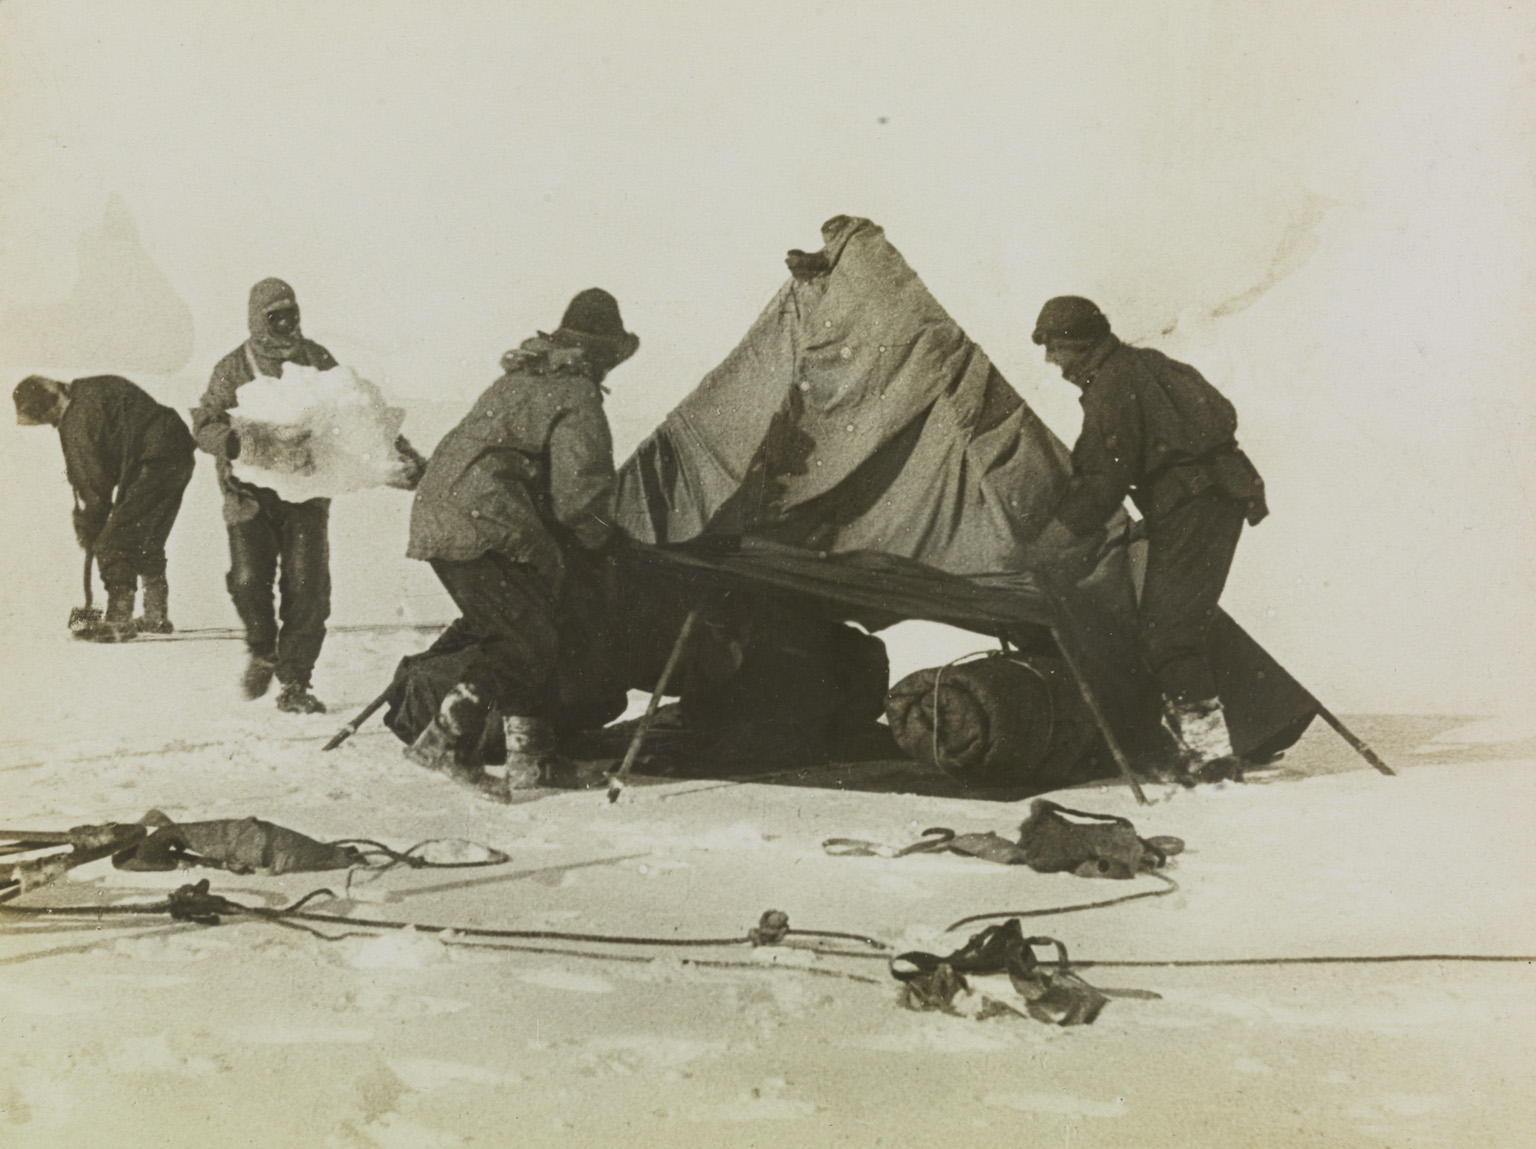 A photograph of Captain Robert Falcon Scott and his companions pitching a tent using ice to ballast down the tent sides